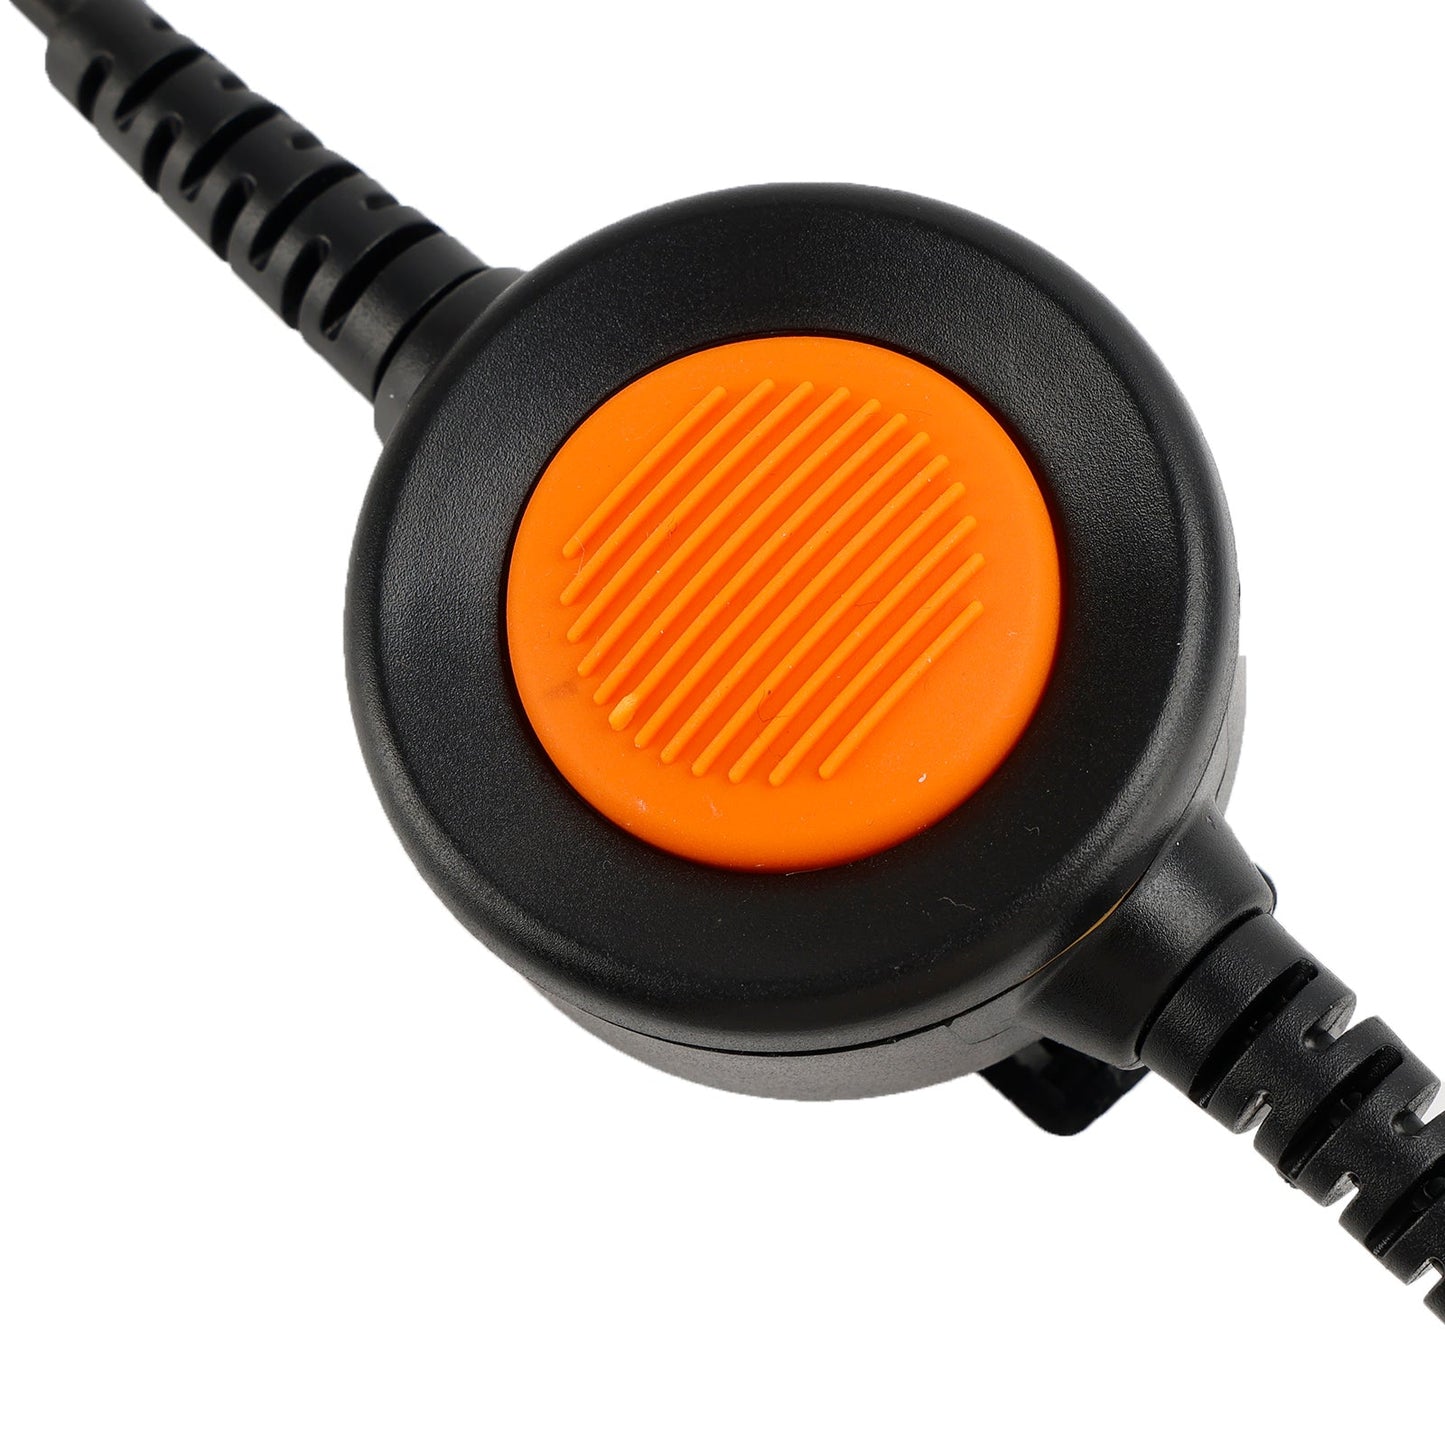 8268-326 Orange Round PTT IP65 Waterproof For XPR6300 XPR6350 XPR6380 XPR6500